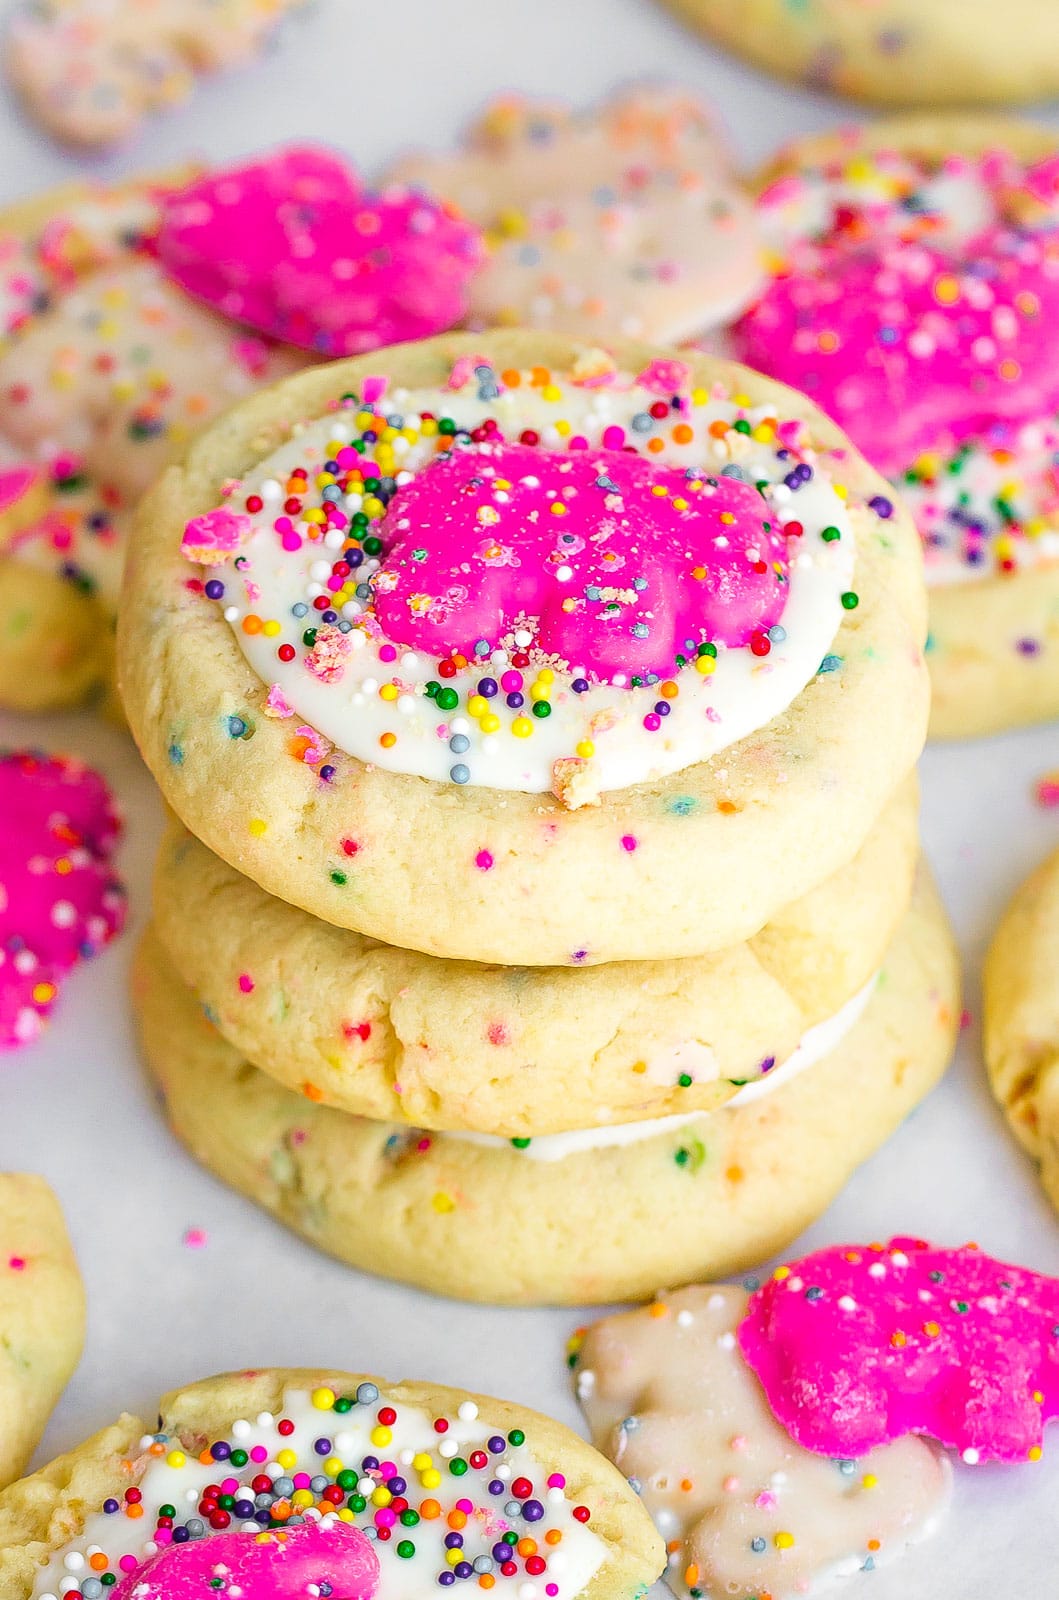 stacked sprinkled sugar cookies with white chocolate frosting, circus animal cookies, and sprinkles